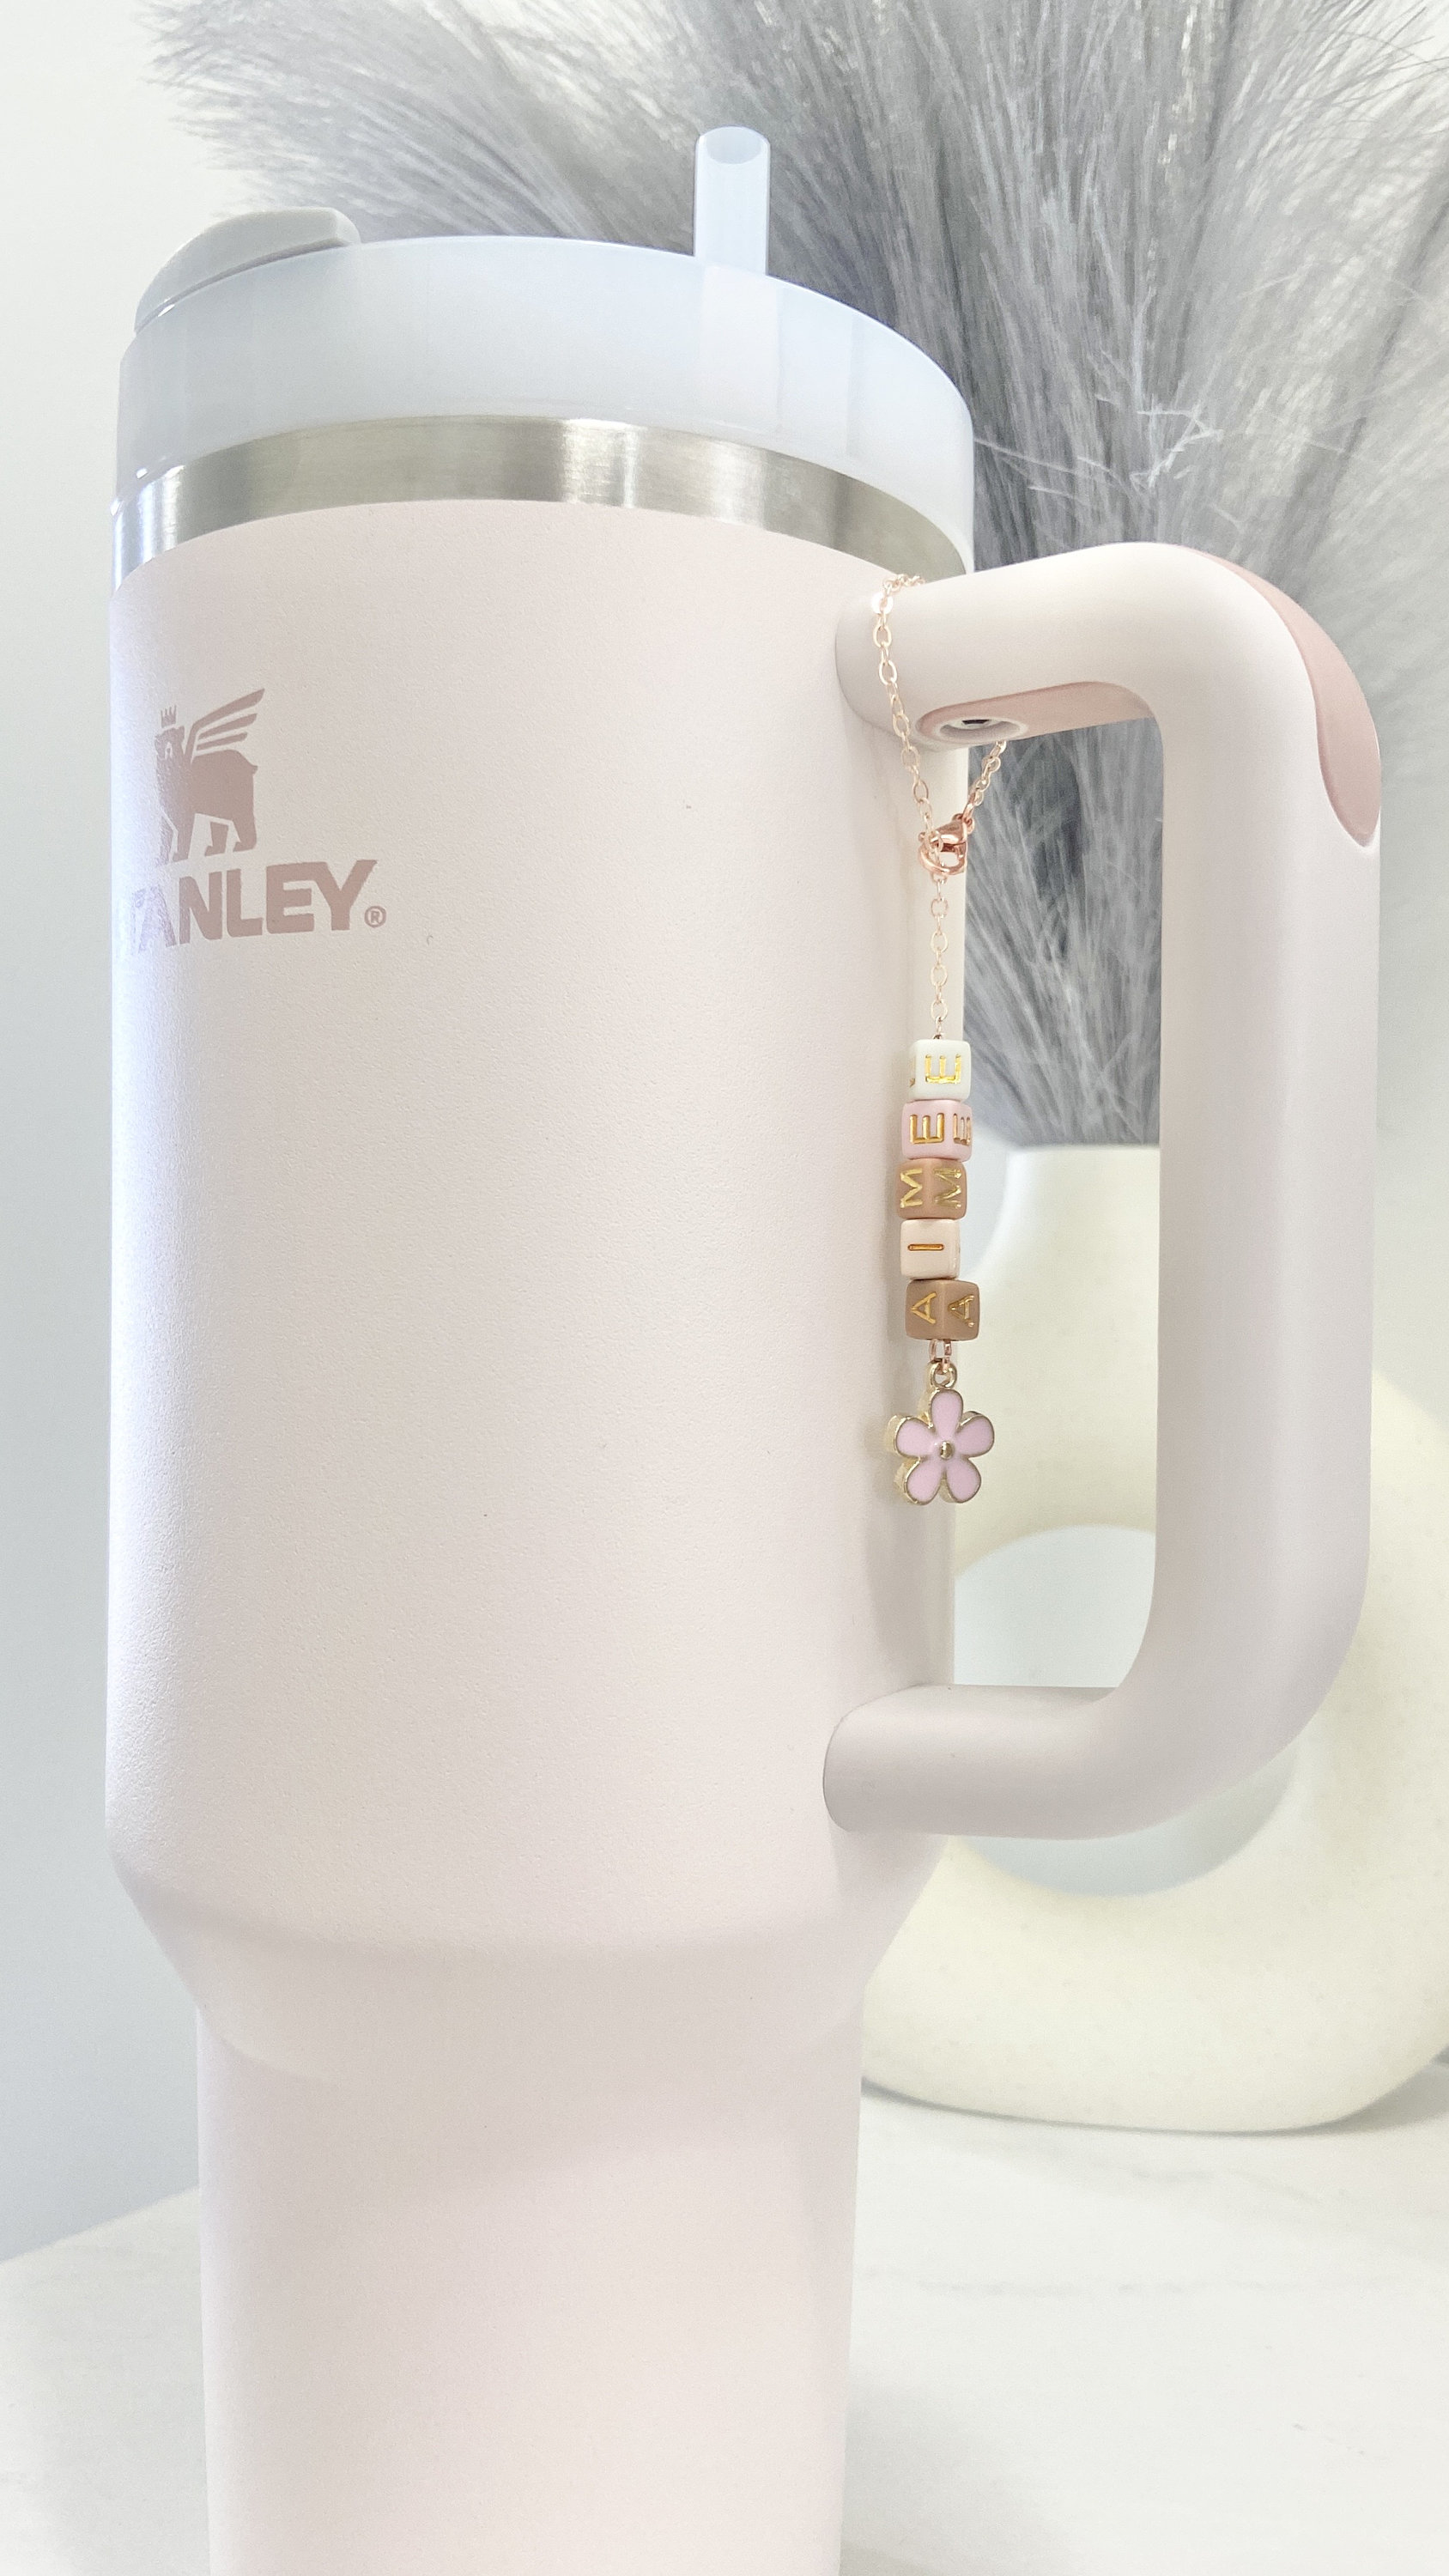 Stanley Tumbler Charm Stanley Accessory Water Bottle Charm Cup Charm  Stanley Cup Charm Tumbler Handle Charms Stanley Cup Gift for Daughter 